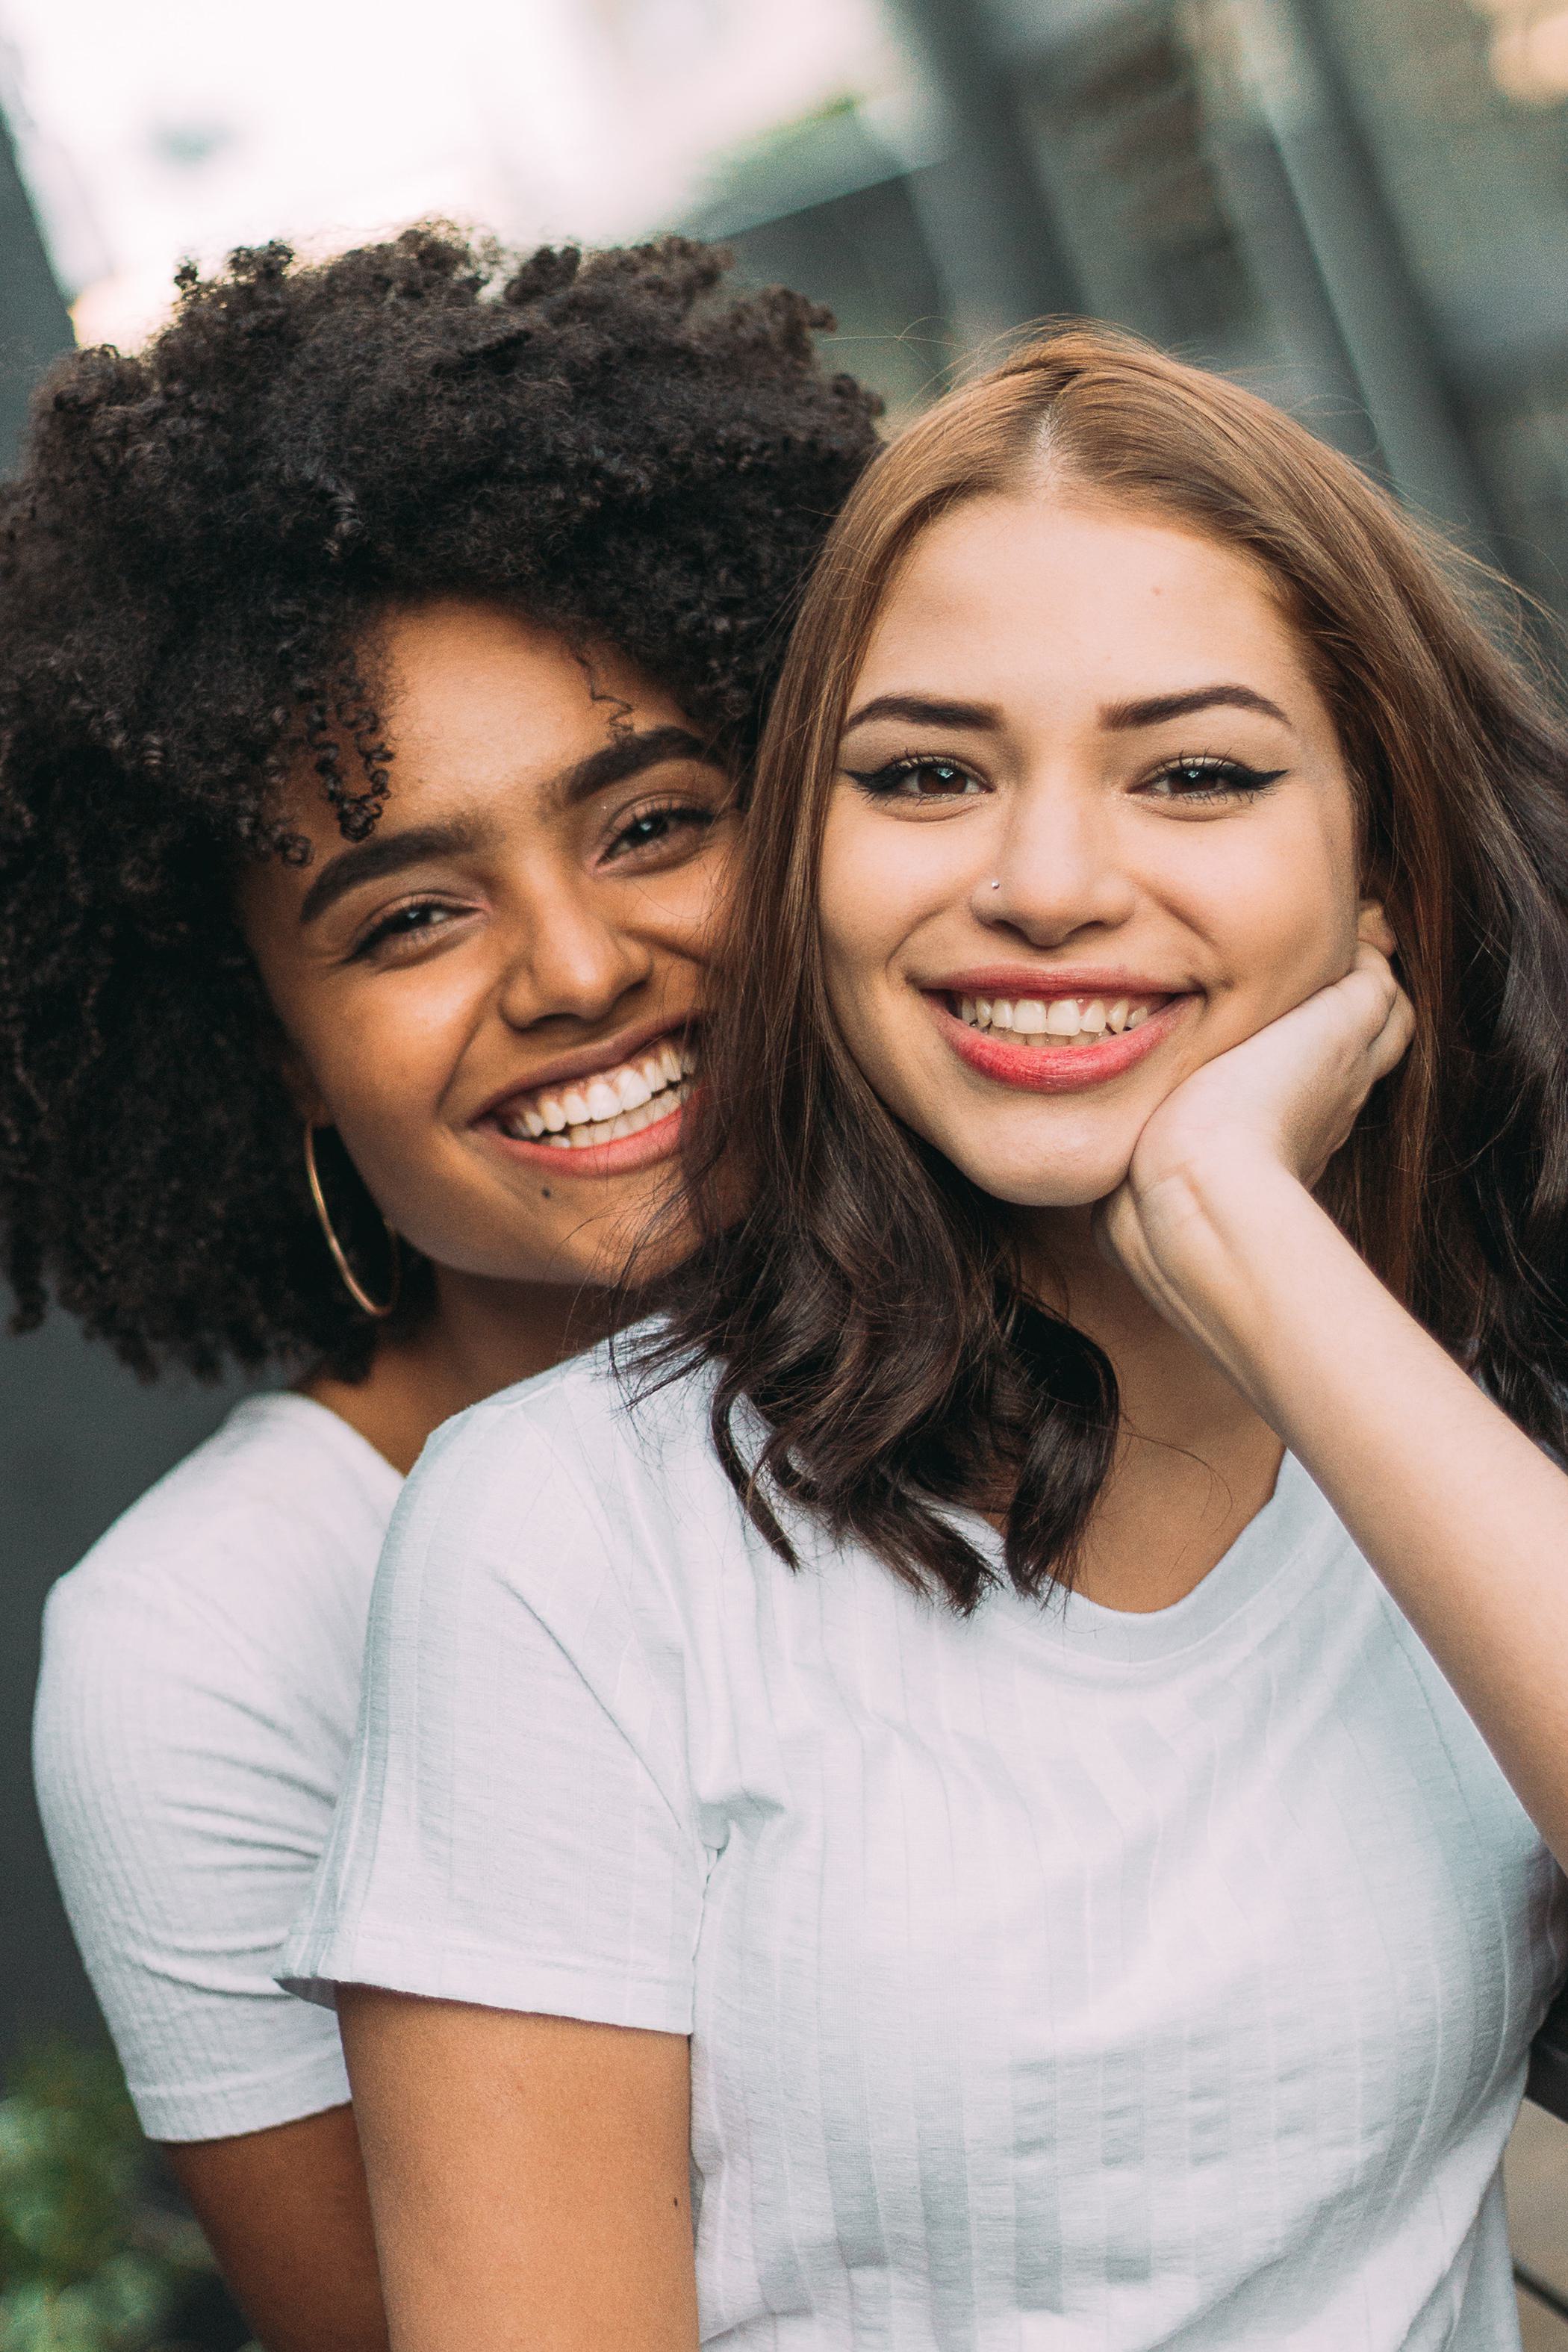 Two diverse young women standing close to each other and smiling